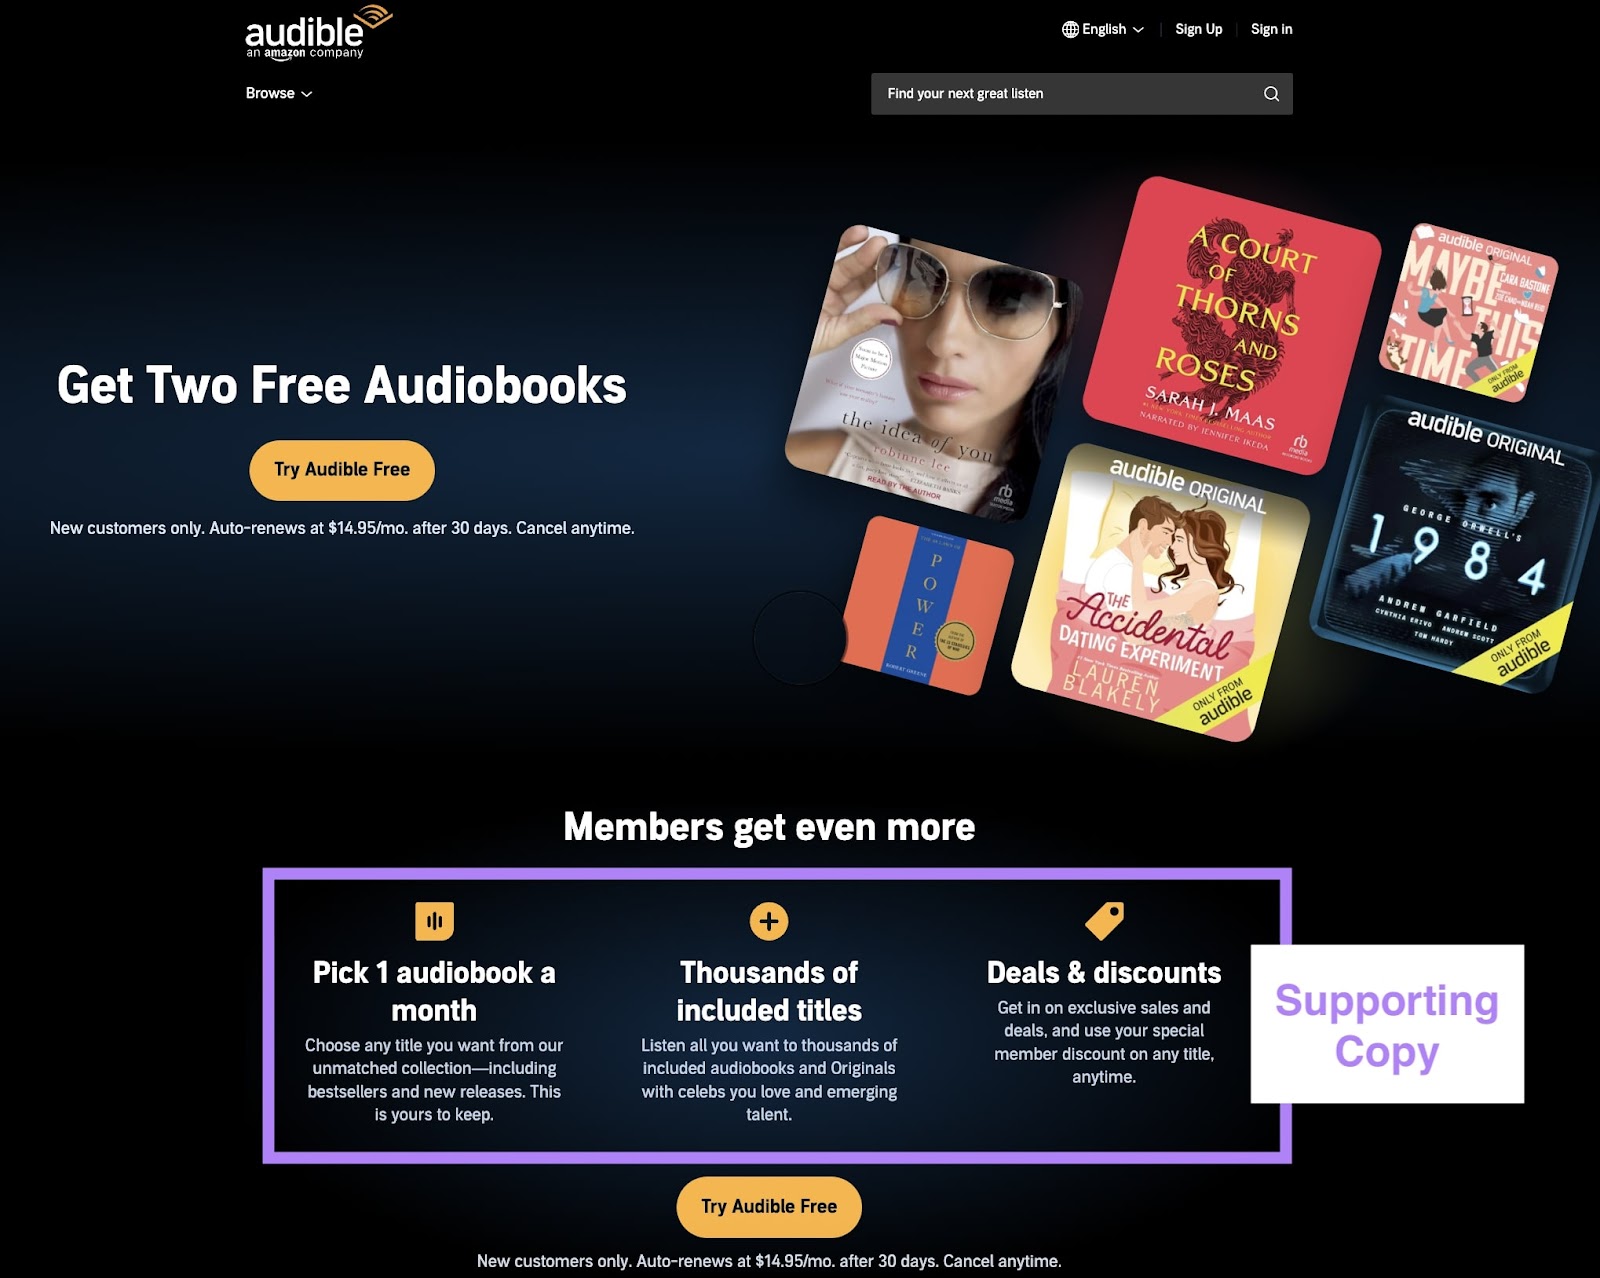 Audiobook covers alongside highlighted supporting copy on Audible's landing page